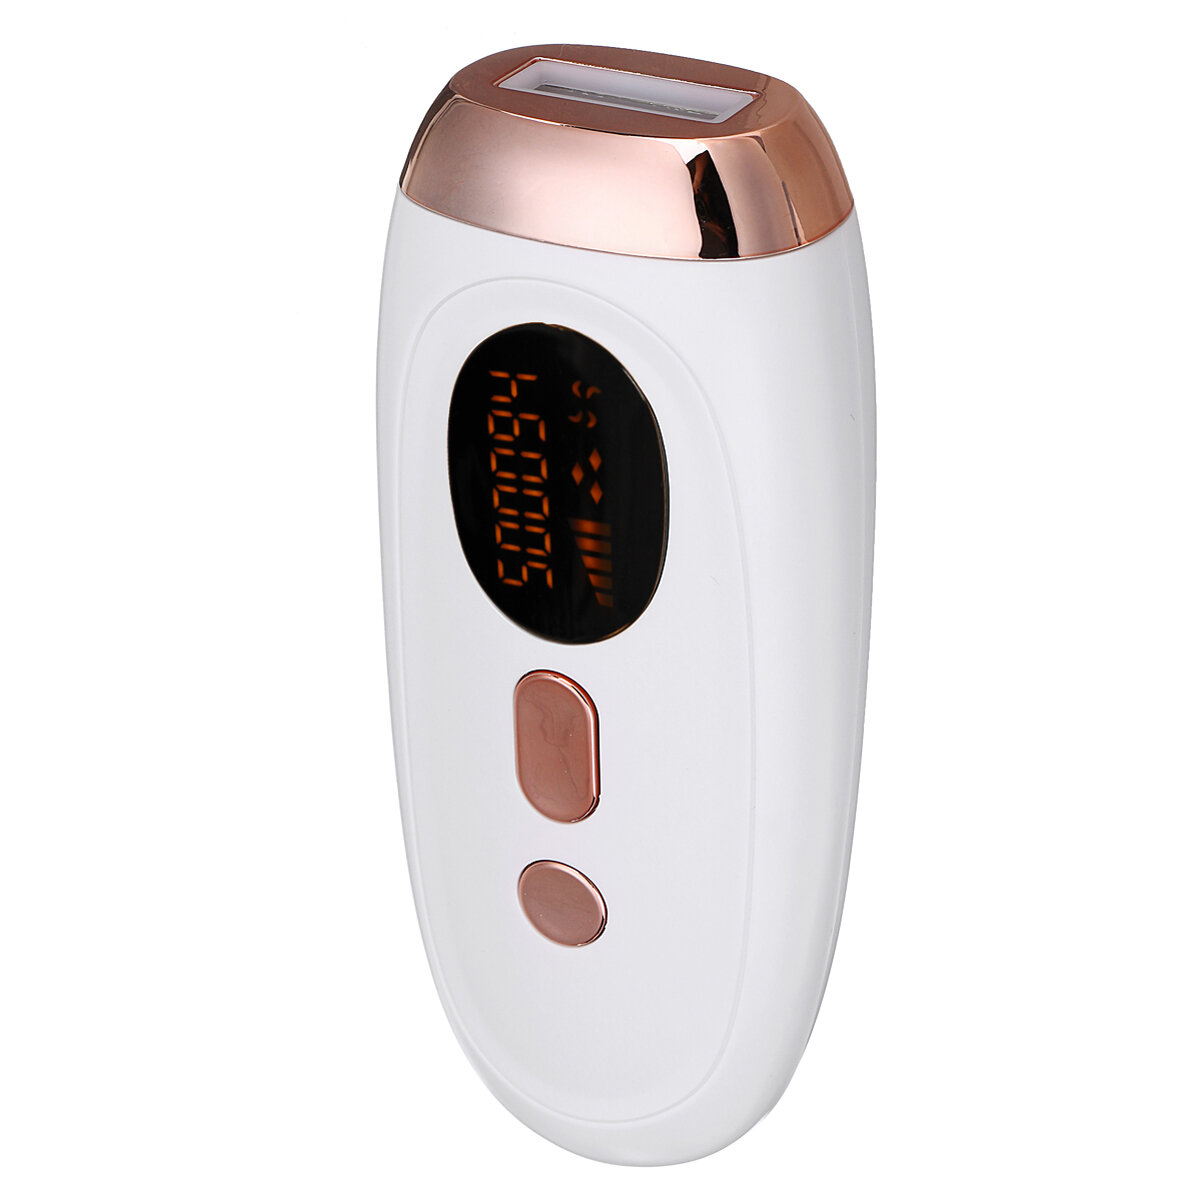 Image of 500000 Flashes IPL Painless Laser Hair Removal Device 5 Gears Permanent Face Hair Remover Epilator